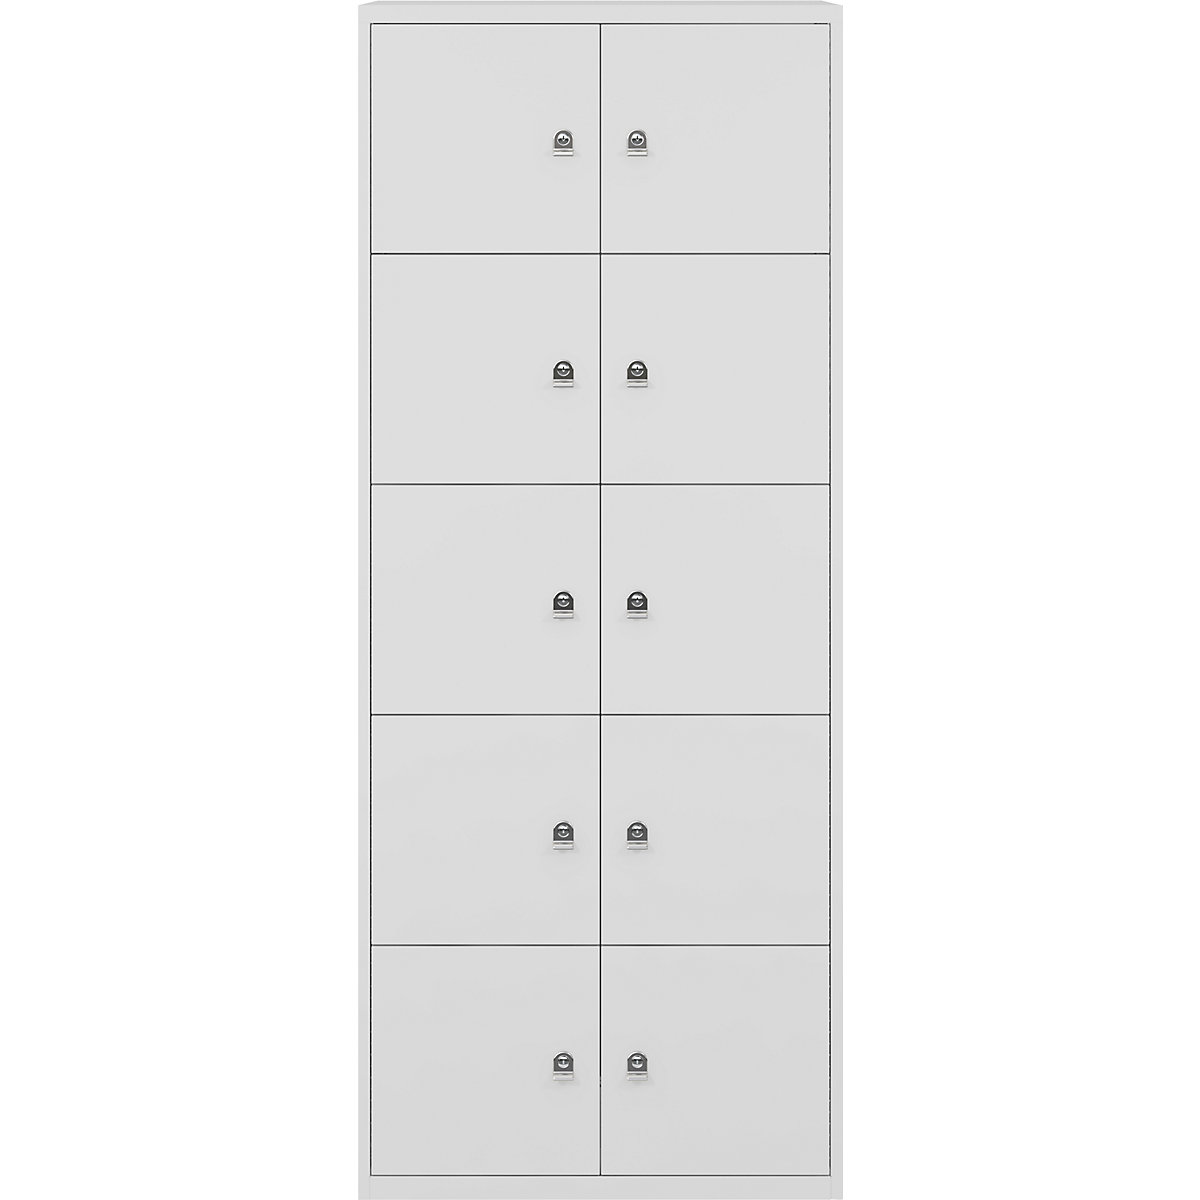 LateralFile™ lodge – BISLEY, with 10 lockable compartments, height 375 mm each, light grey